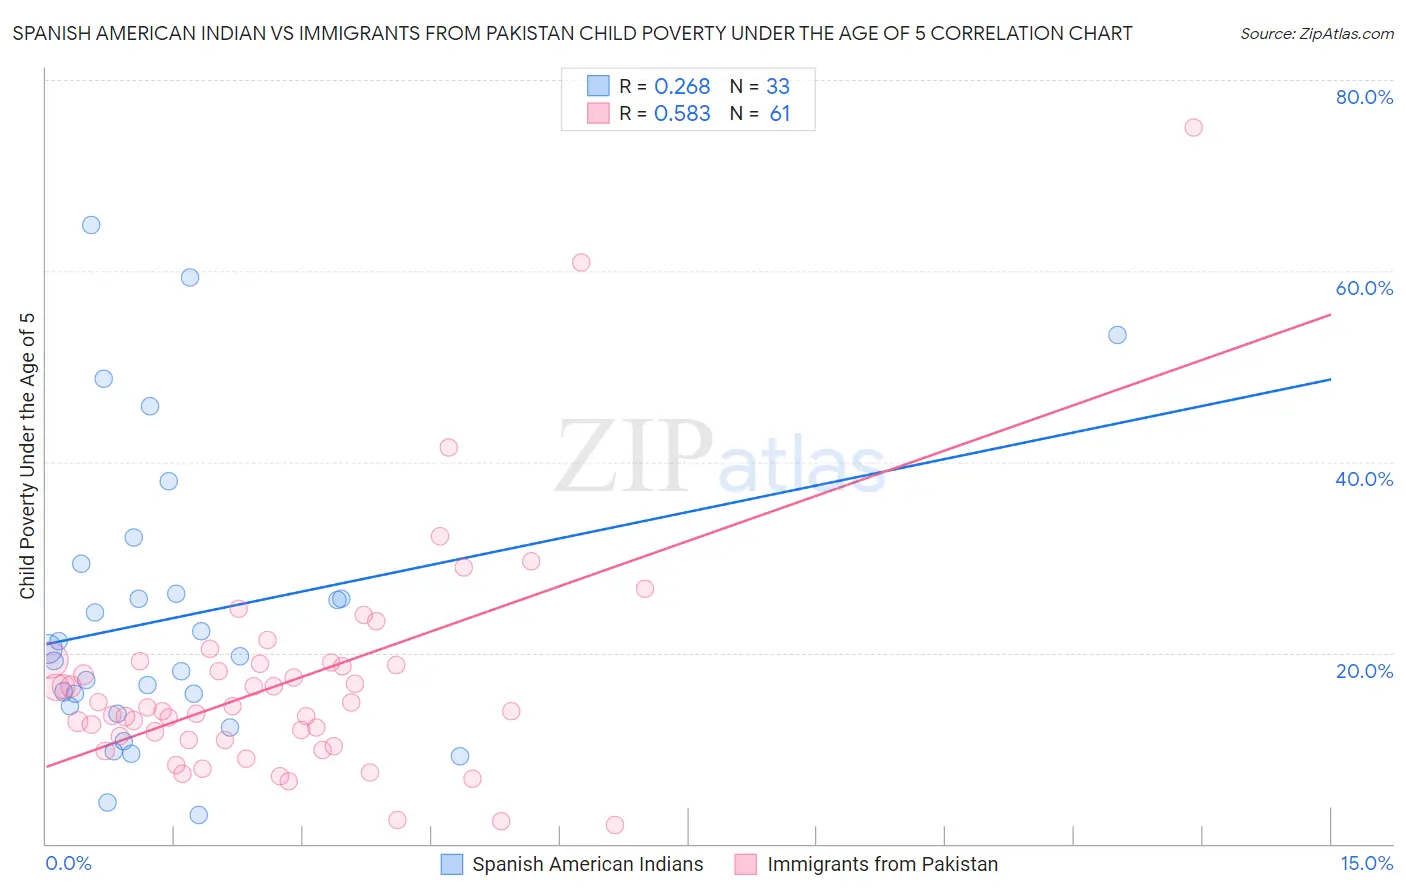 Spanish American Indian vs Immigrants from Pakistan Child Poverty Under the Age of 5